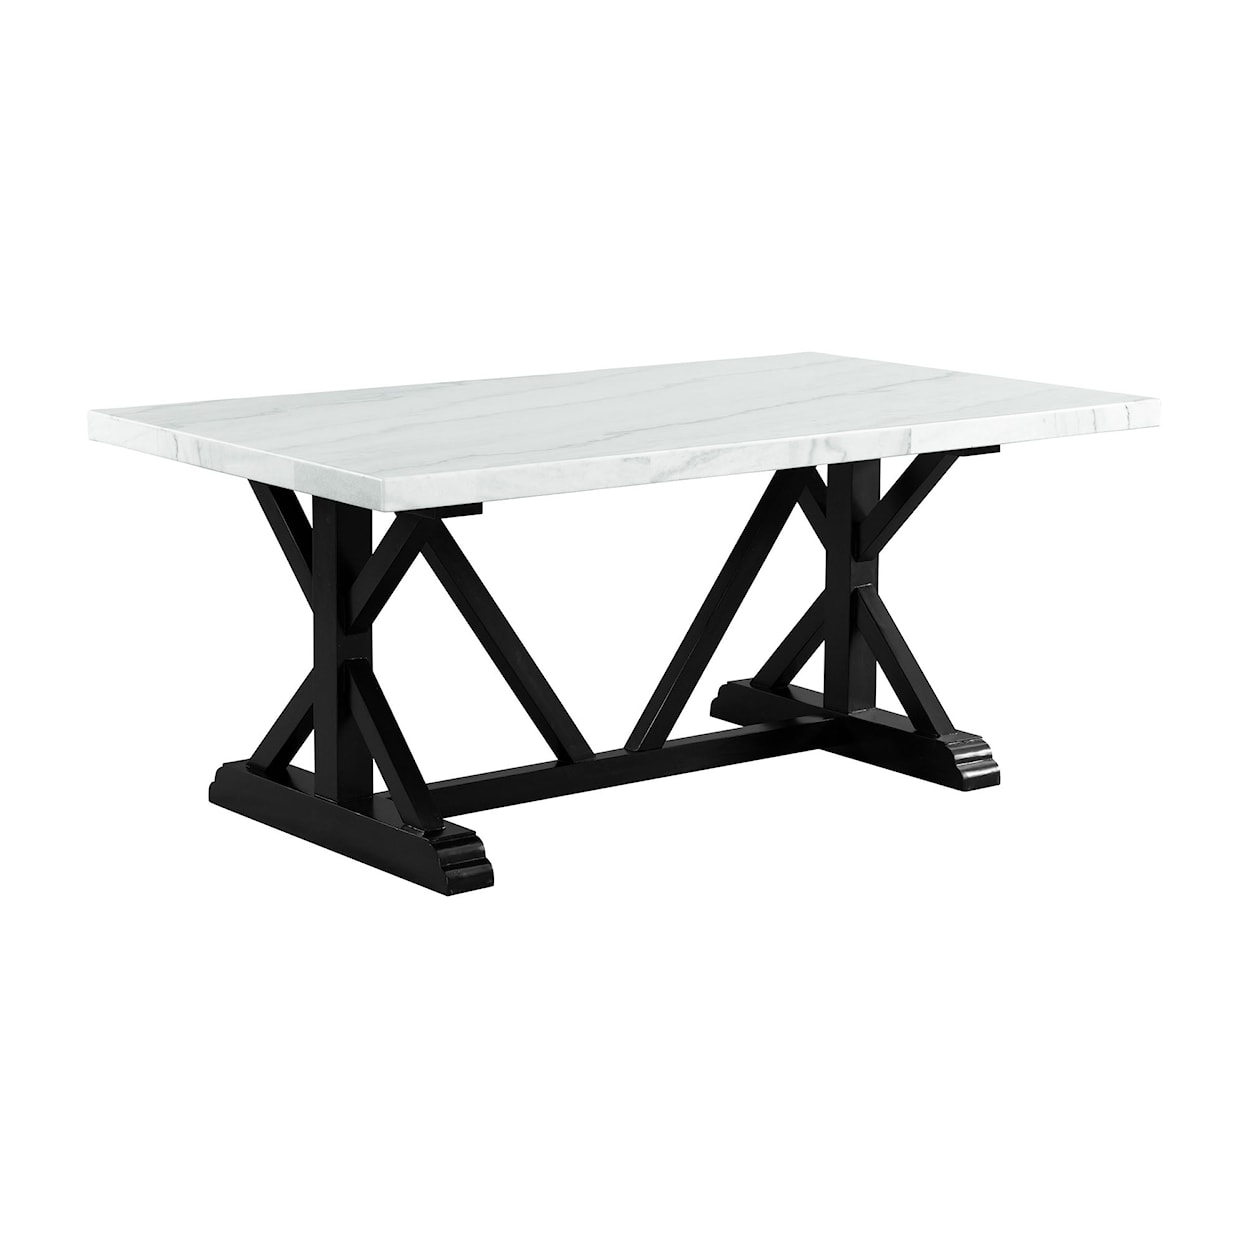 Elements Tuscany Marble Dining Table